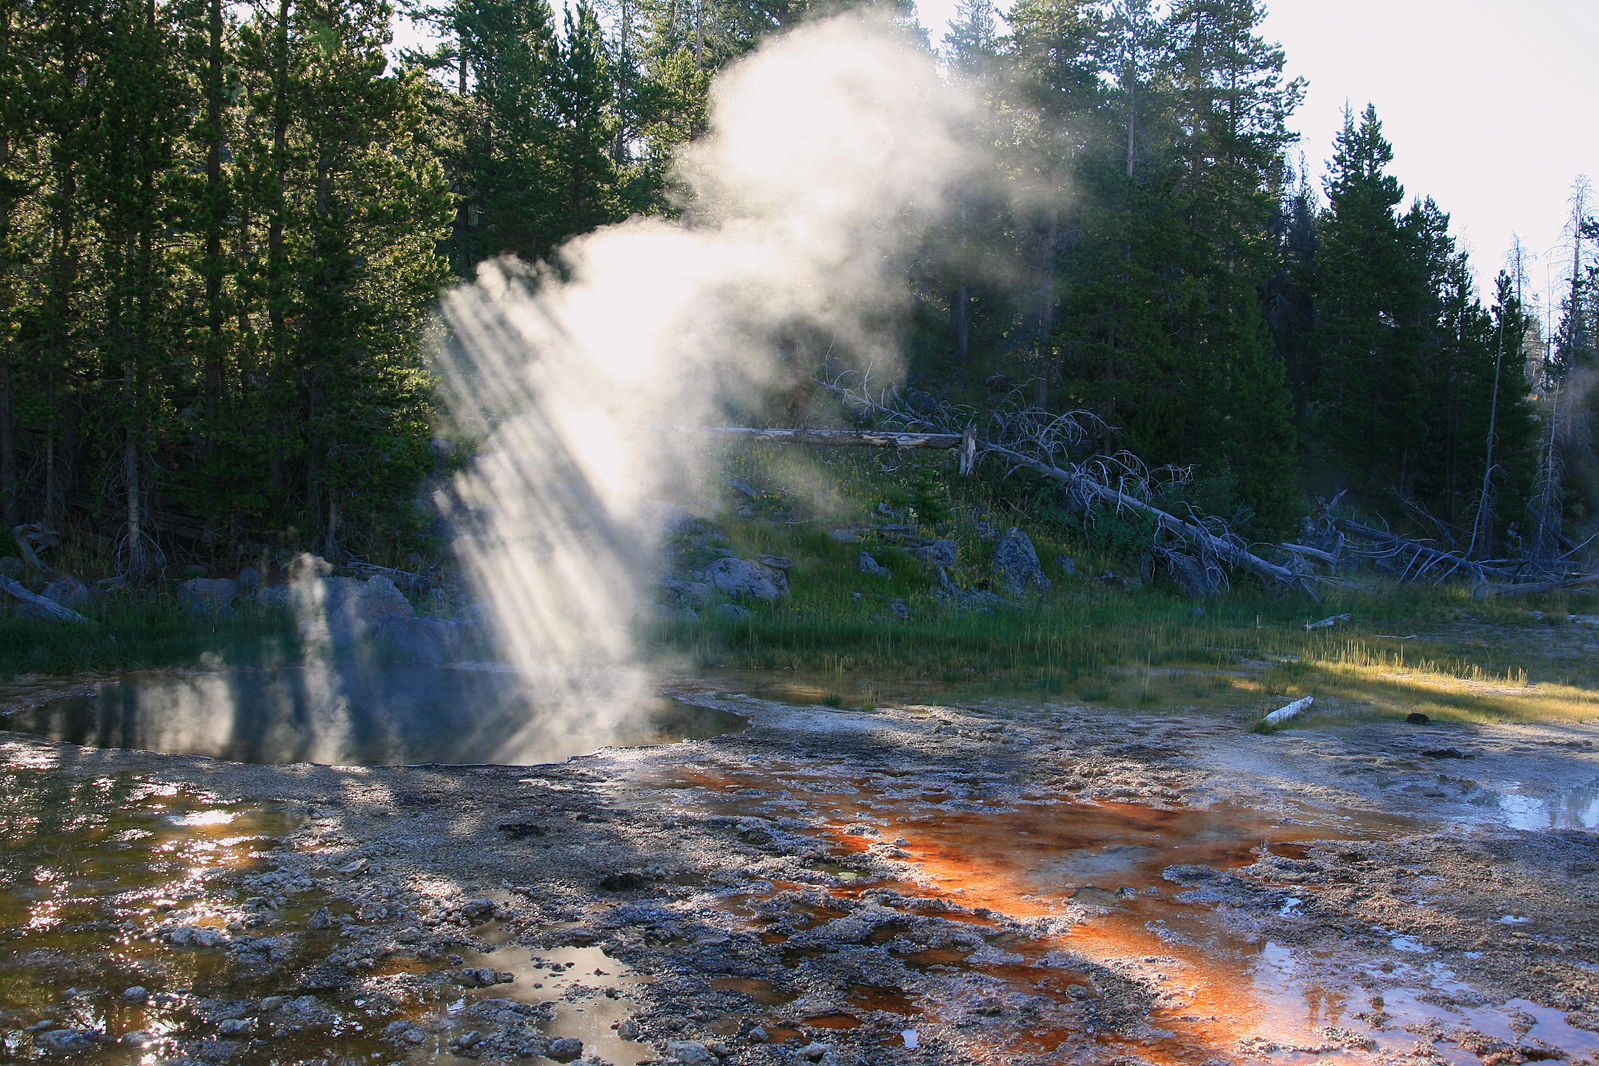 A photo of steam being released from a hot spring, the steam is iluminated by sunlight coming in through the evergreen trees in the forest